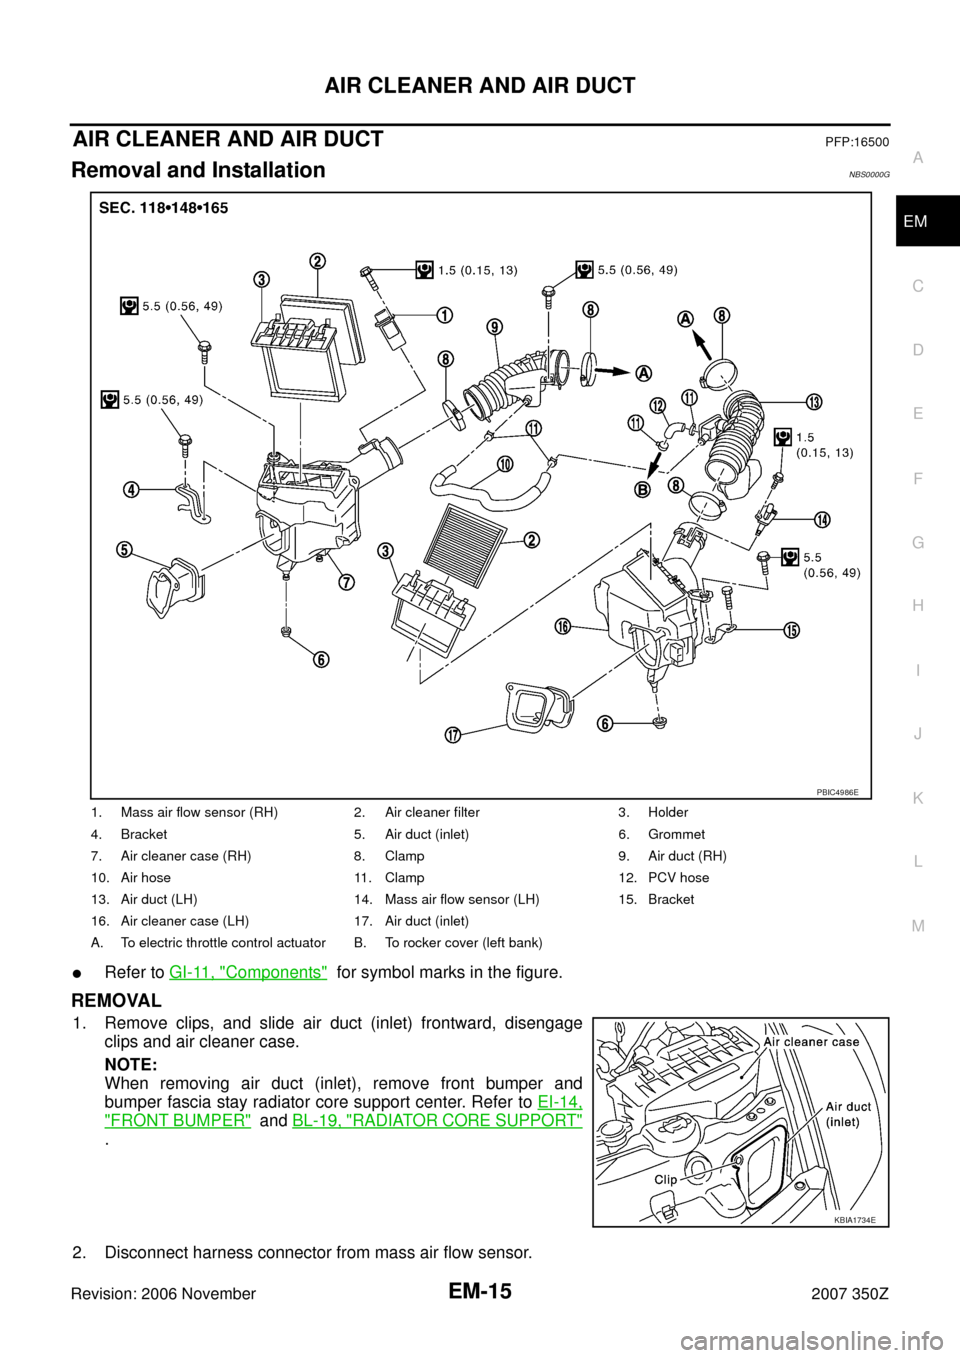 NISSAN 350Z 2007 Z33 Engine Mechanical User Guide AIR CLEANER AND AIR DUCT
EM-15
C
D
E
F
G
H
I
J
K
L
MA
EM
Revision: 2006 November2007 350Z
AIR CLEANER AND AIR DUCTPFP:16500
Removal and InstallationNBS0000G
Refer to GI-11, "Components"  for symbol m